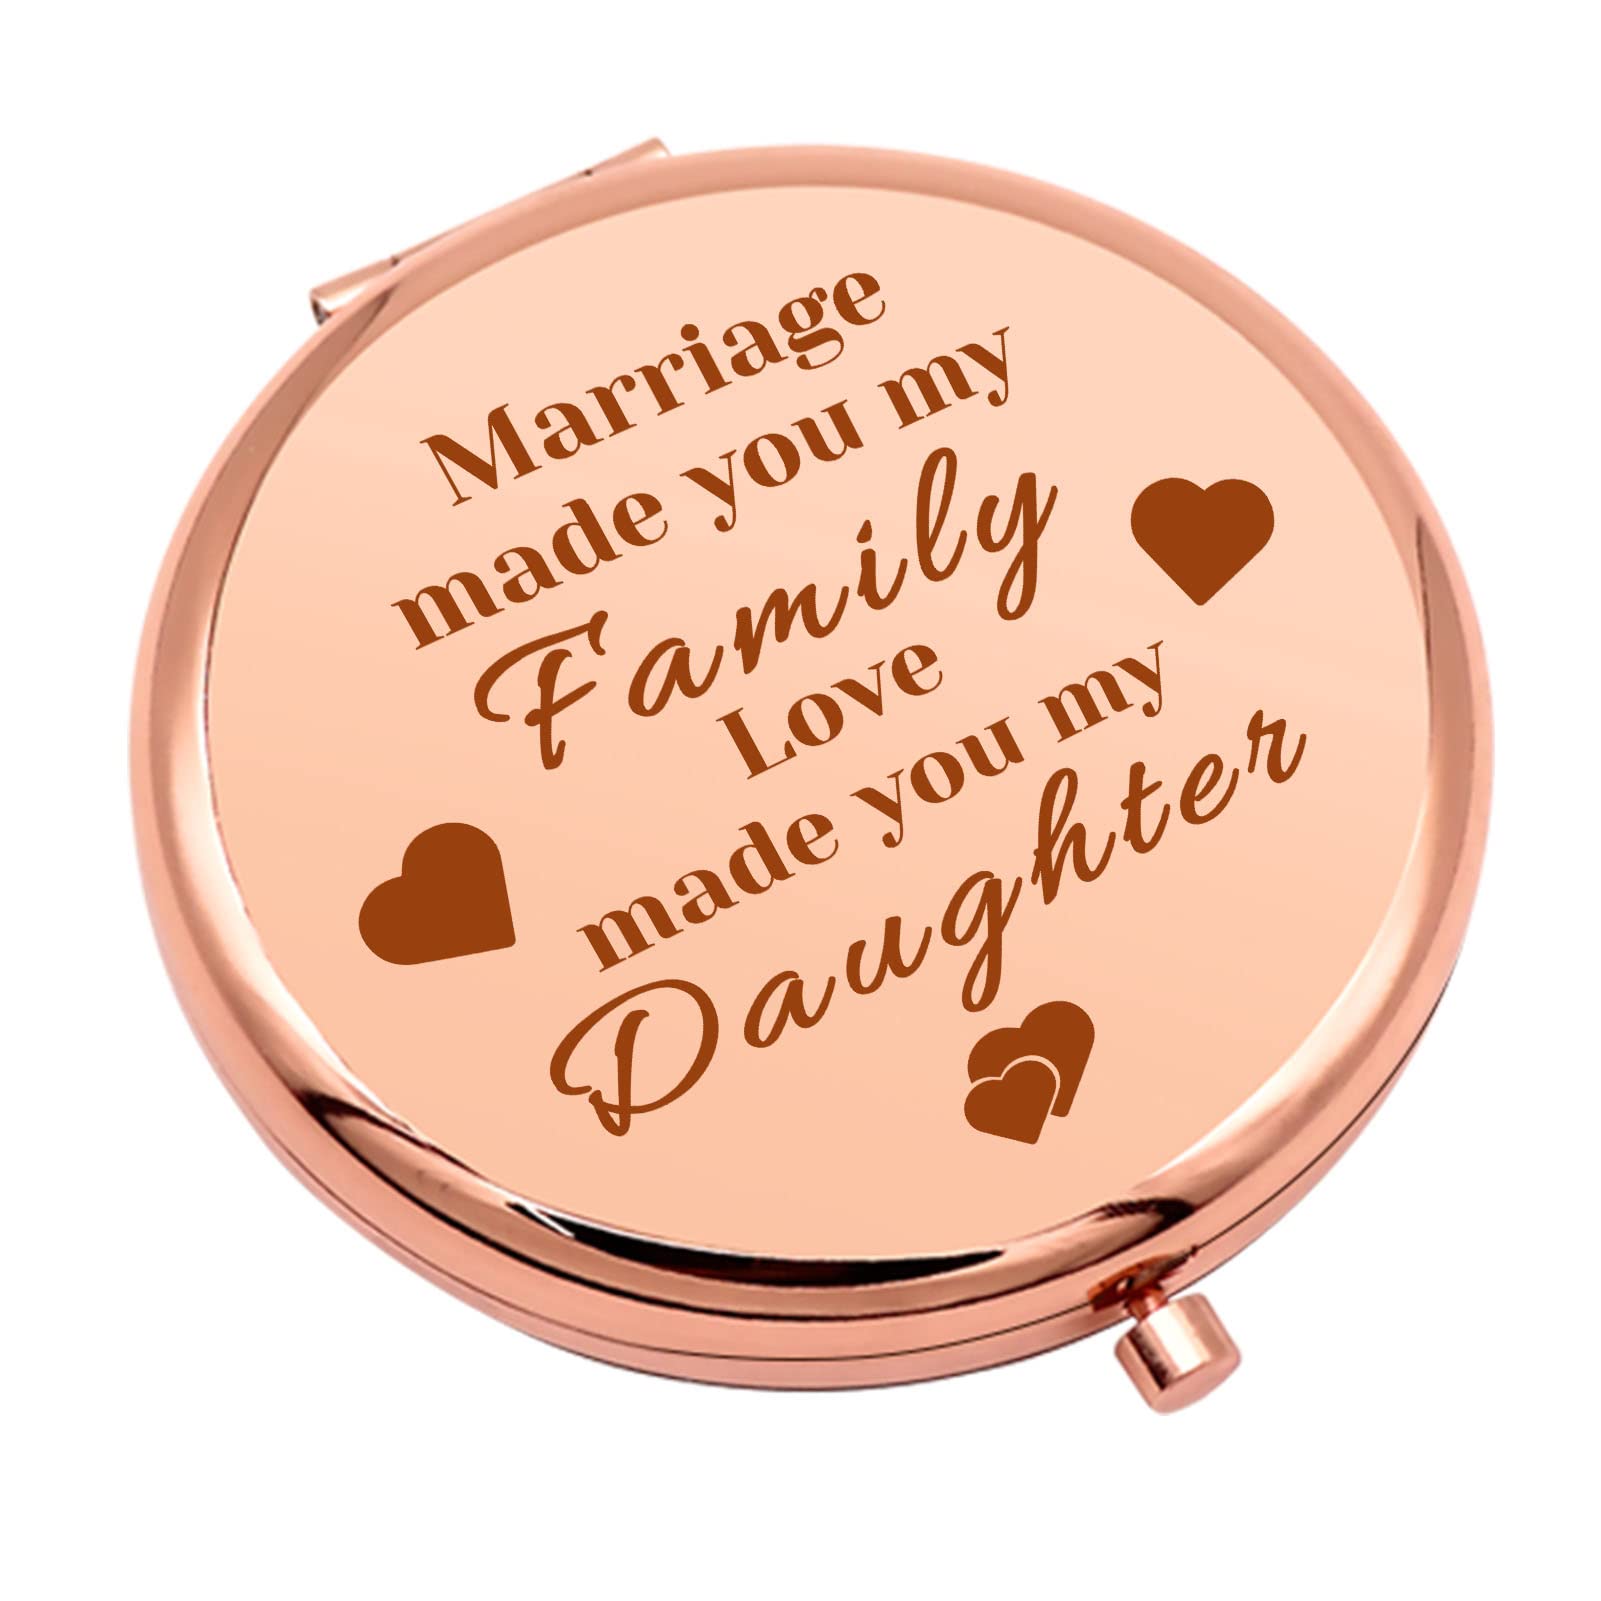 Grandma of The Groom Gifts Engagement Gifts for Women Compact Mirror  Grandma Wedding Gift Thank You Gift Folding Makeup Mirror for Grandmother  Nana Wedding Party Gifts